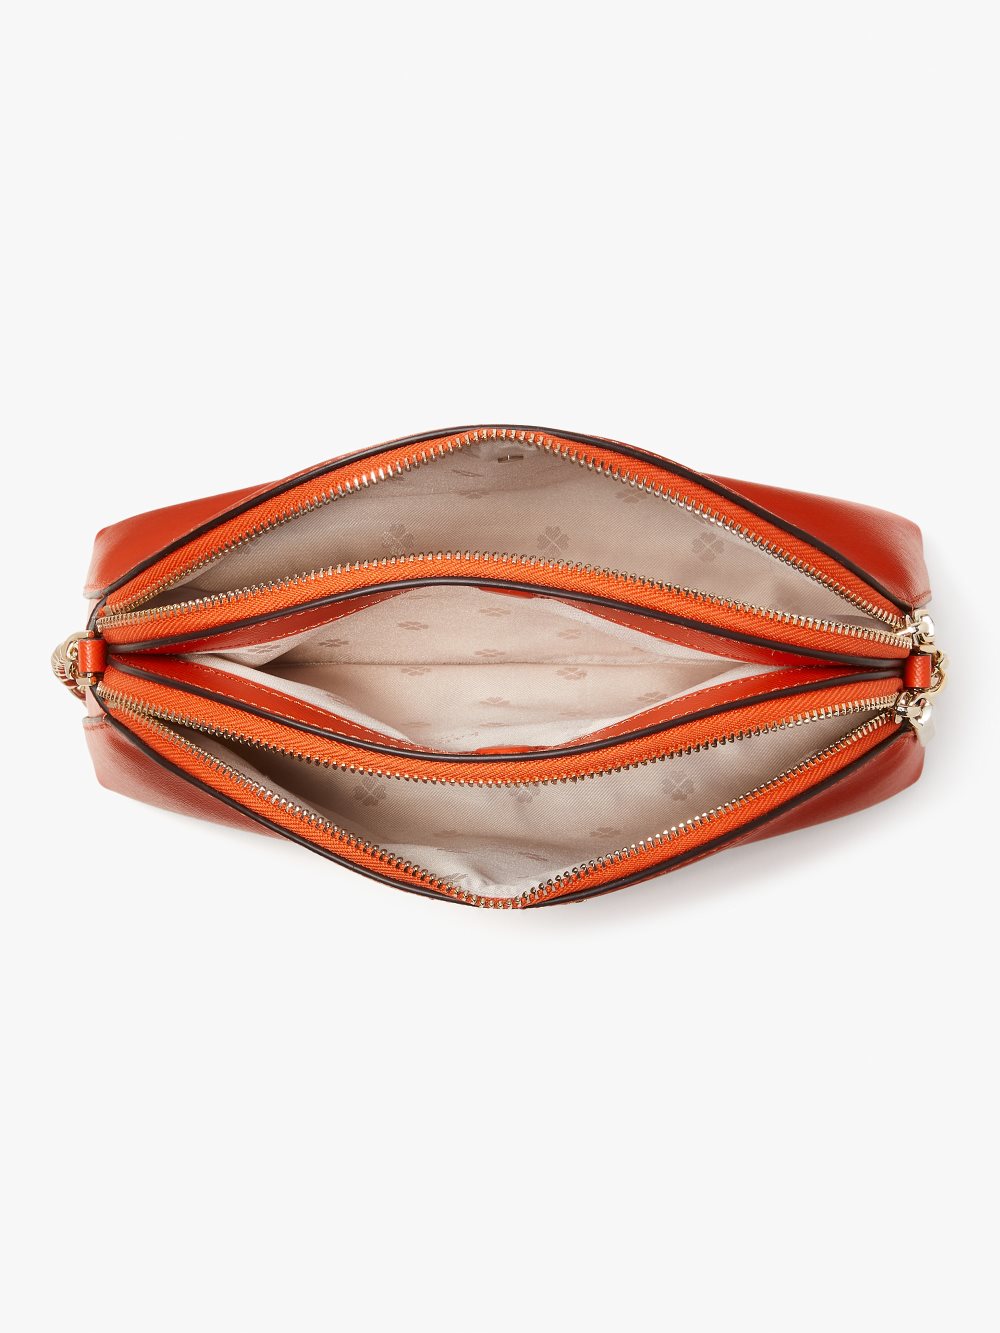 Women's dried apricot spencer double-zip dome crossbody | Kate Spade